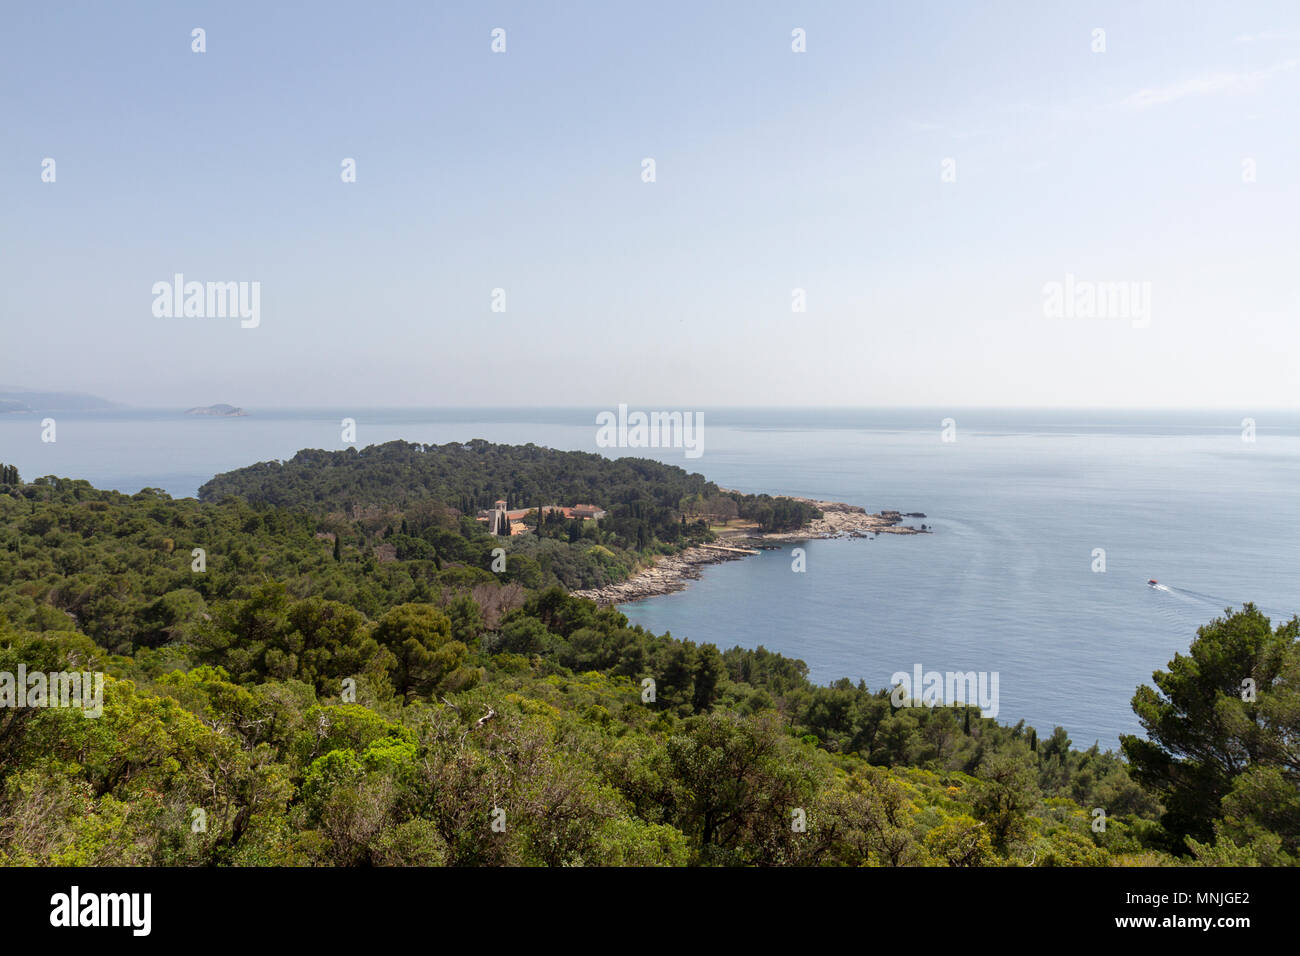 View from Fort Royal over the southern part of Lokrum Island, in the Adriatic Sea off Dubrovnik, Croatia. Stock Photo